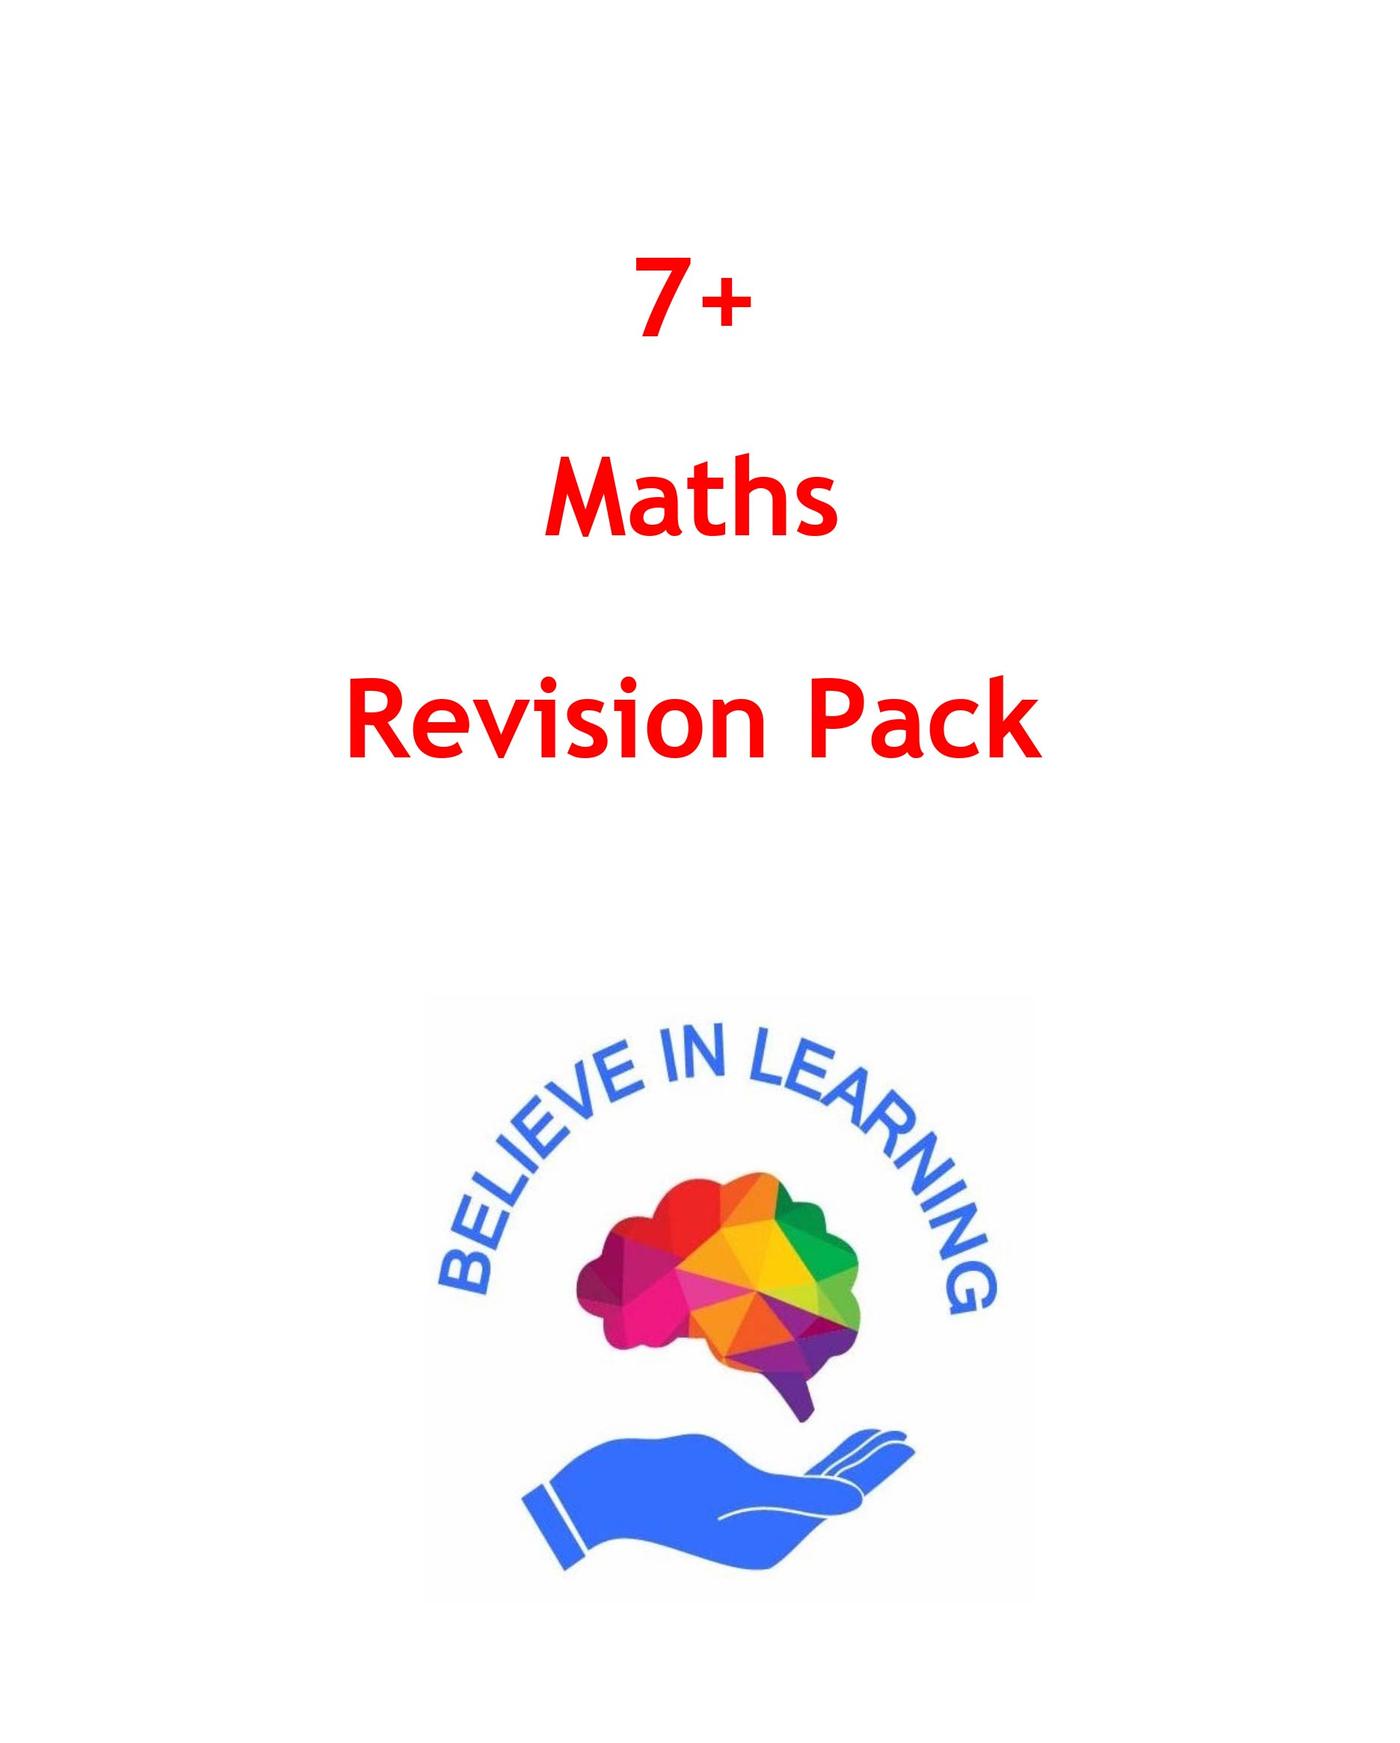 7+ Maths Revision Pack